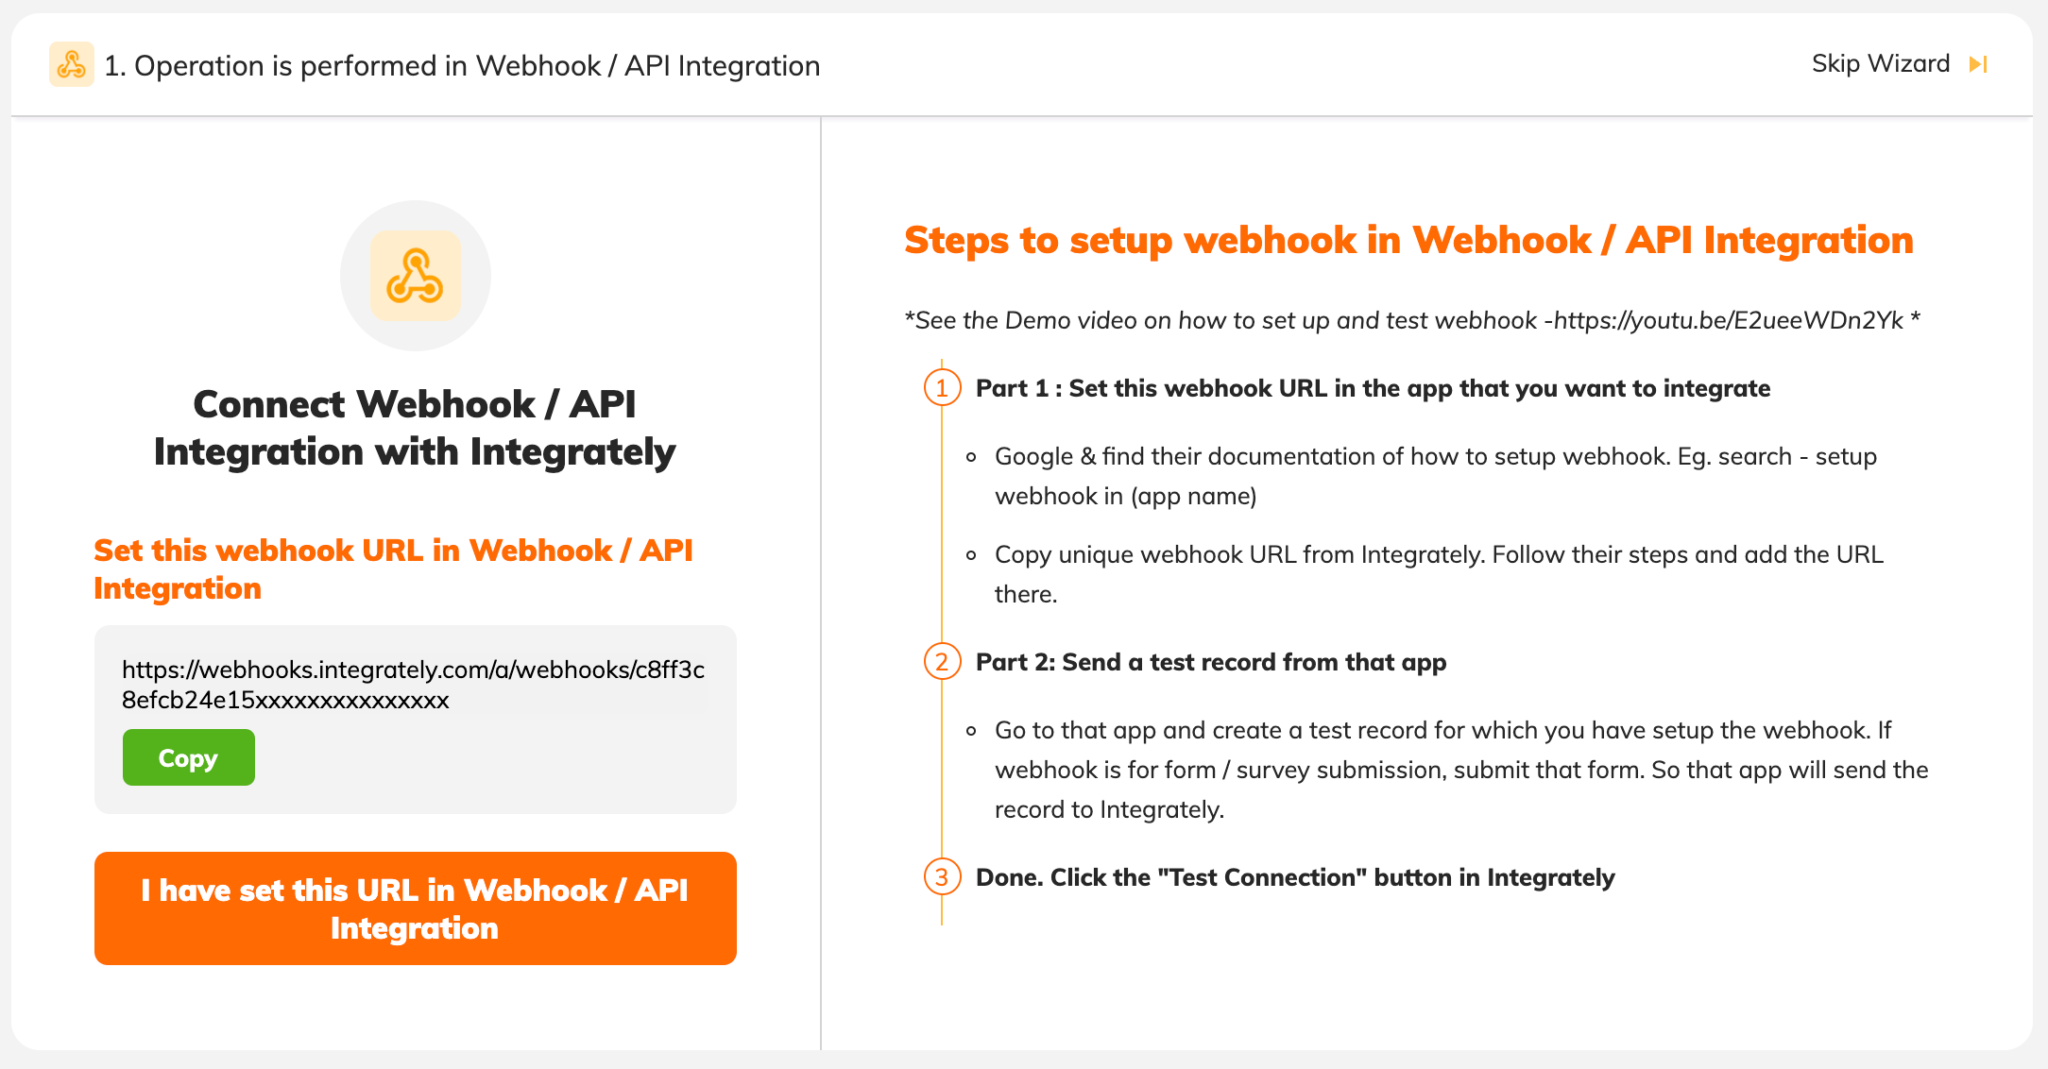 The Integrately of the Pabbly webhooks module